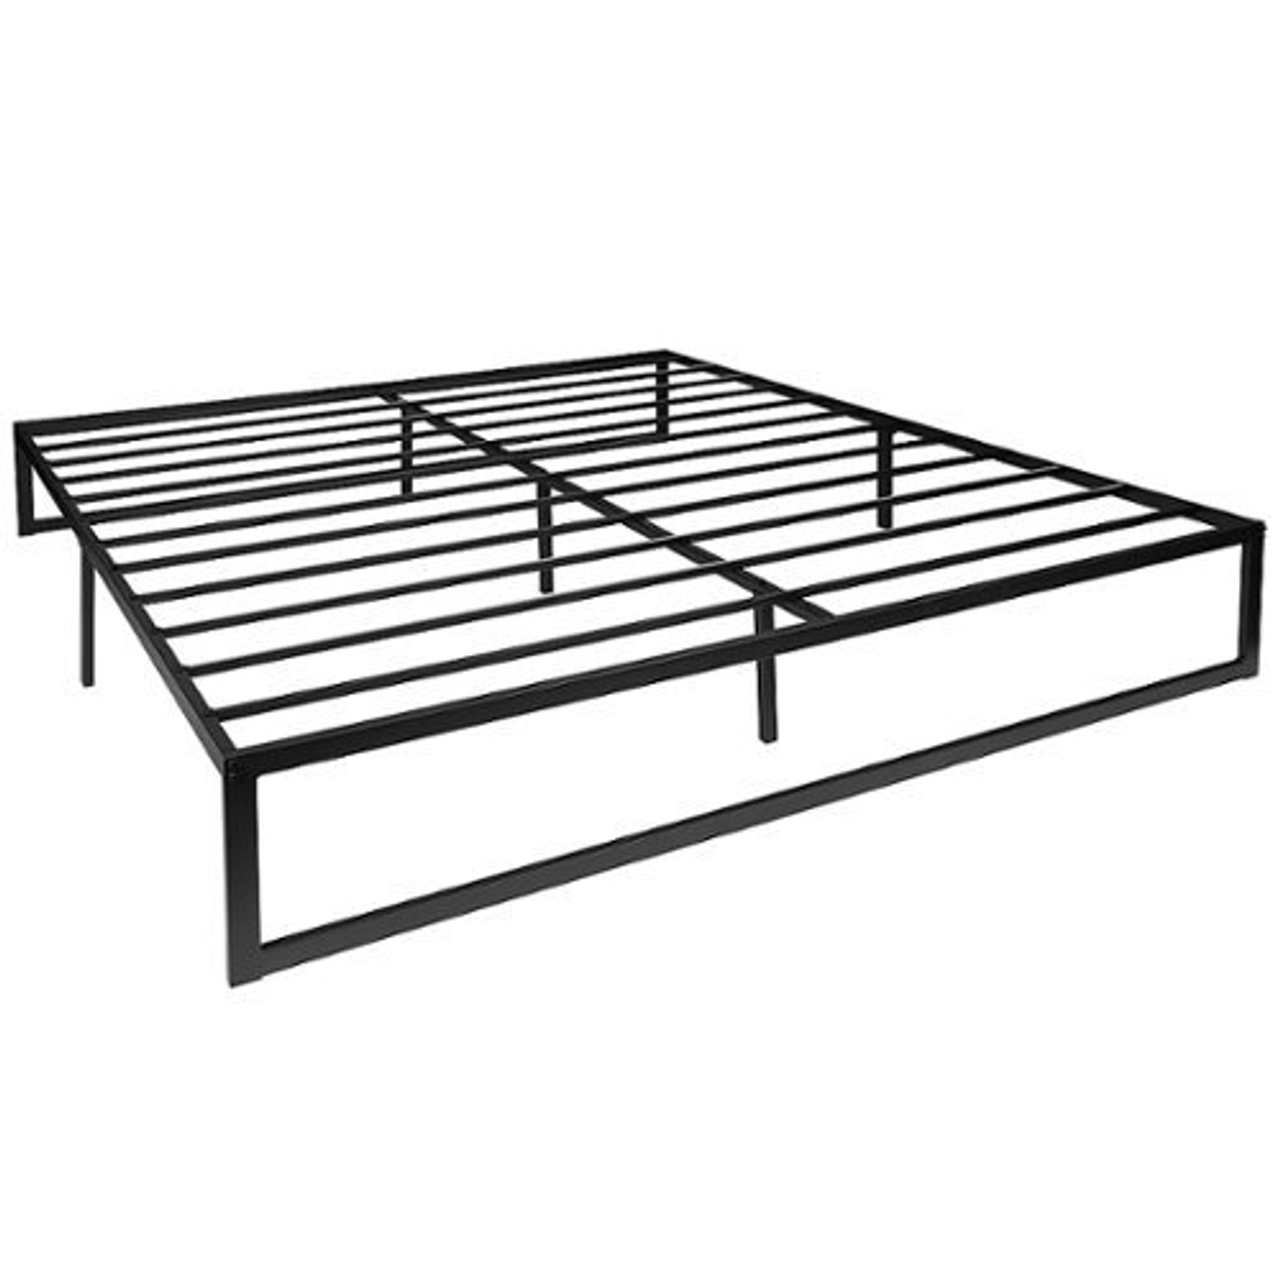 Flash Furniture - Universal 14 Inch Metal Platform Bed Frame - No Box Spring Needed w/ Steel Slat Support and Quick Lock Functionality - Black